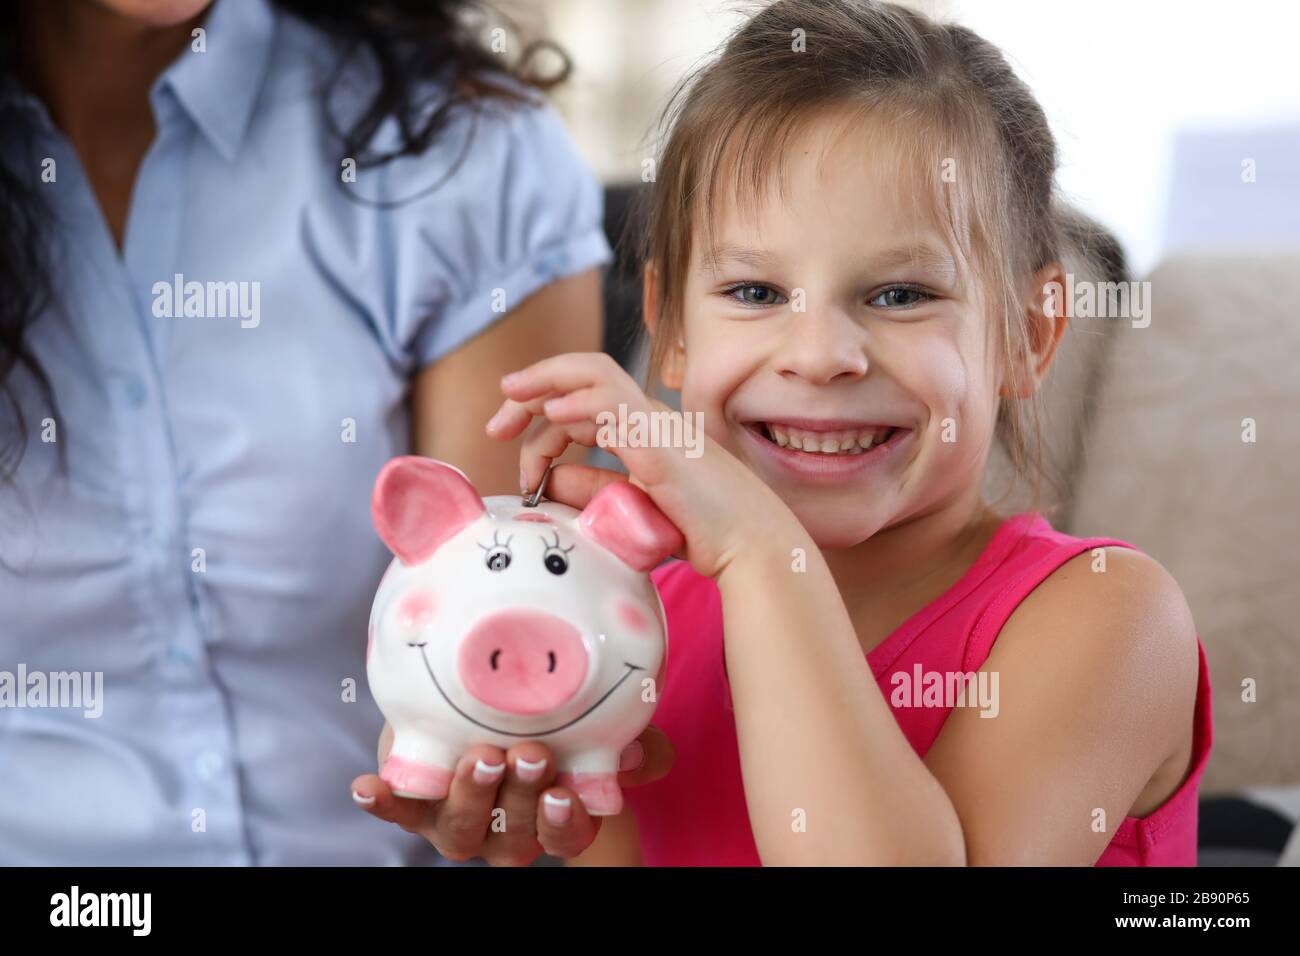 Child putting coin in thrift-box Stock Photo